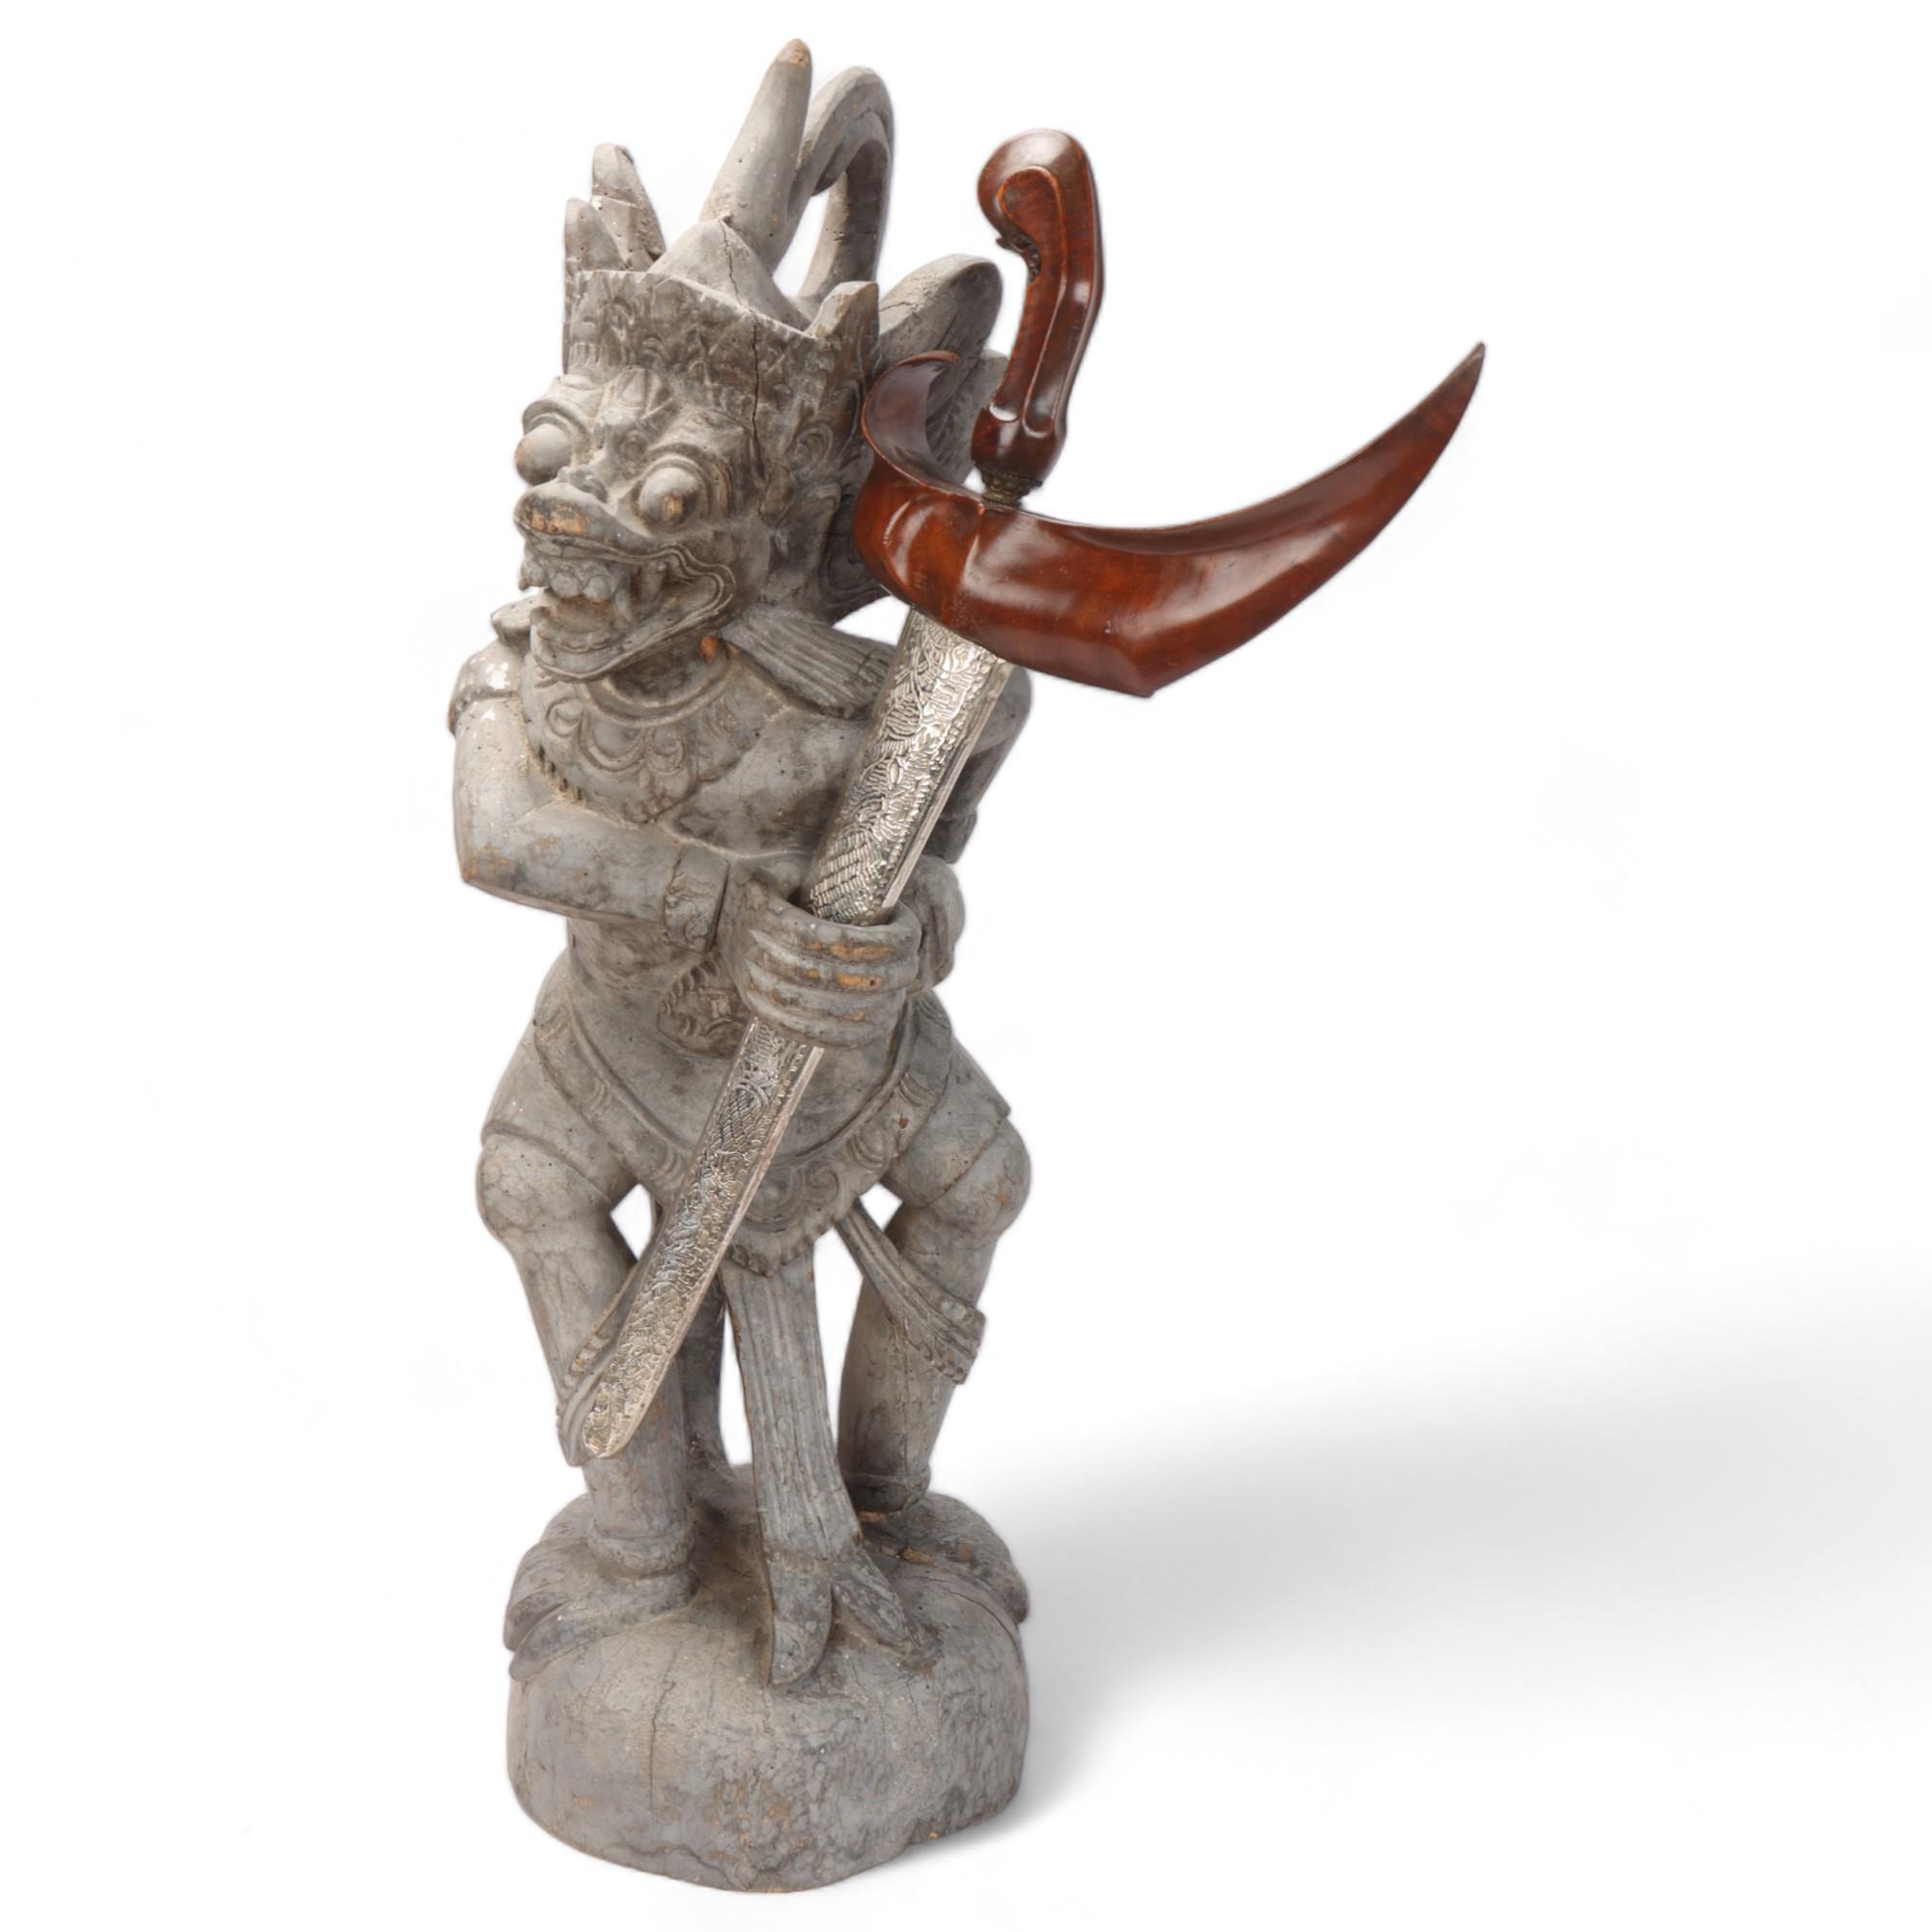 A Malayan carved wood grotesque figure Kris stand, together with a Kris dagger in white metal